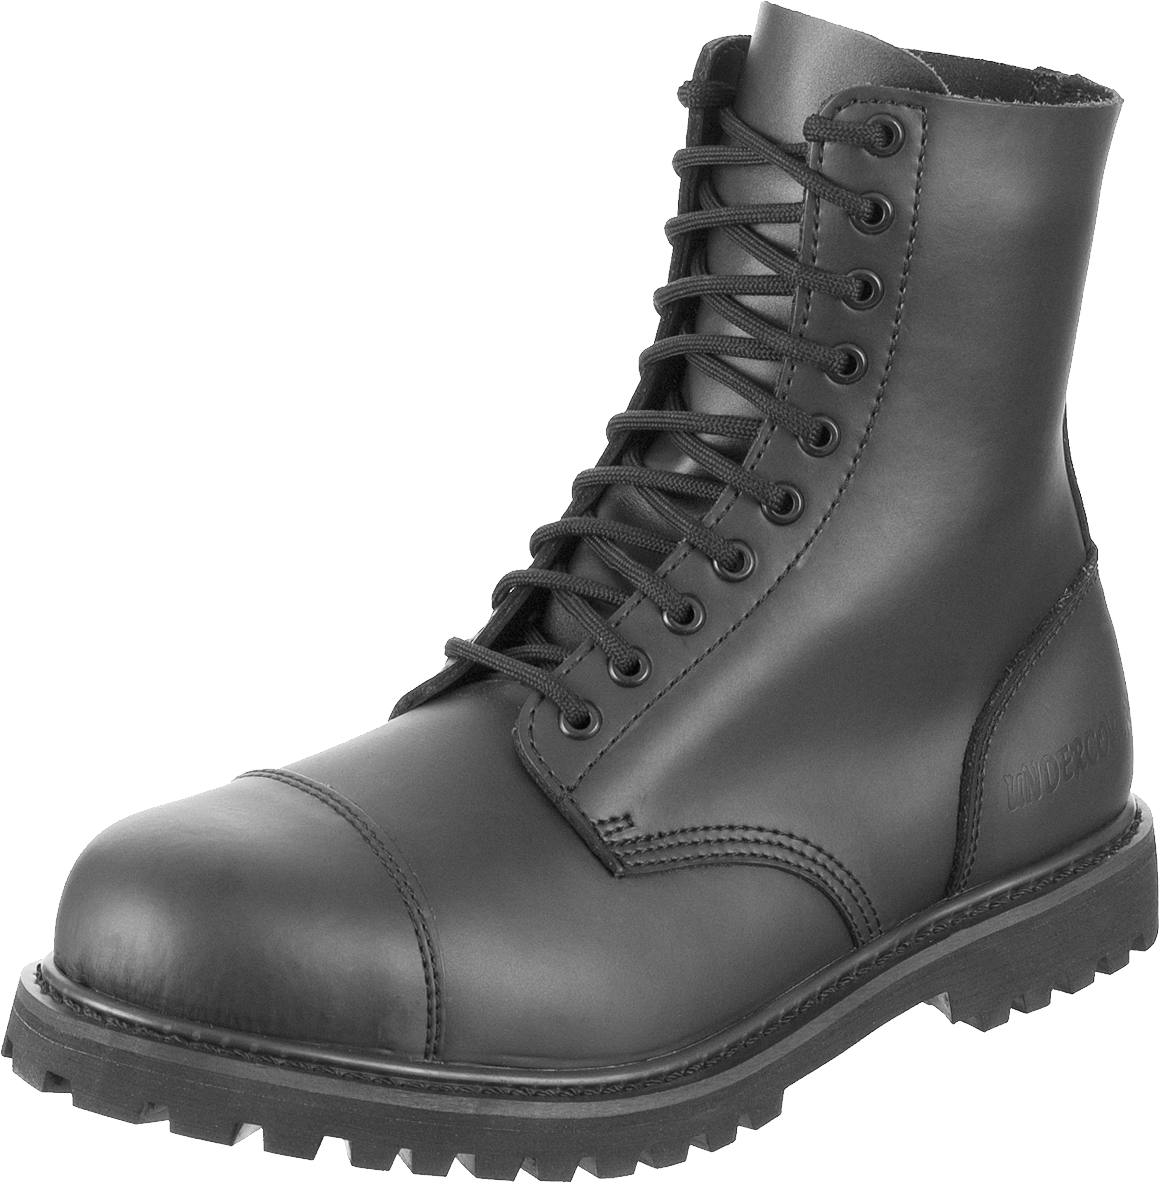 Black army Boots PNG Image